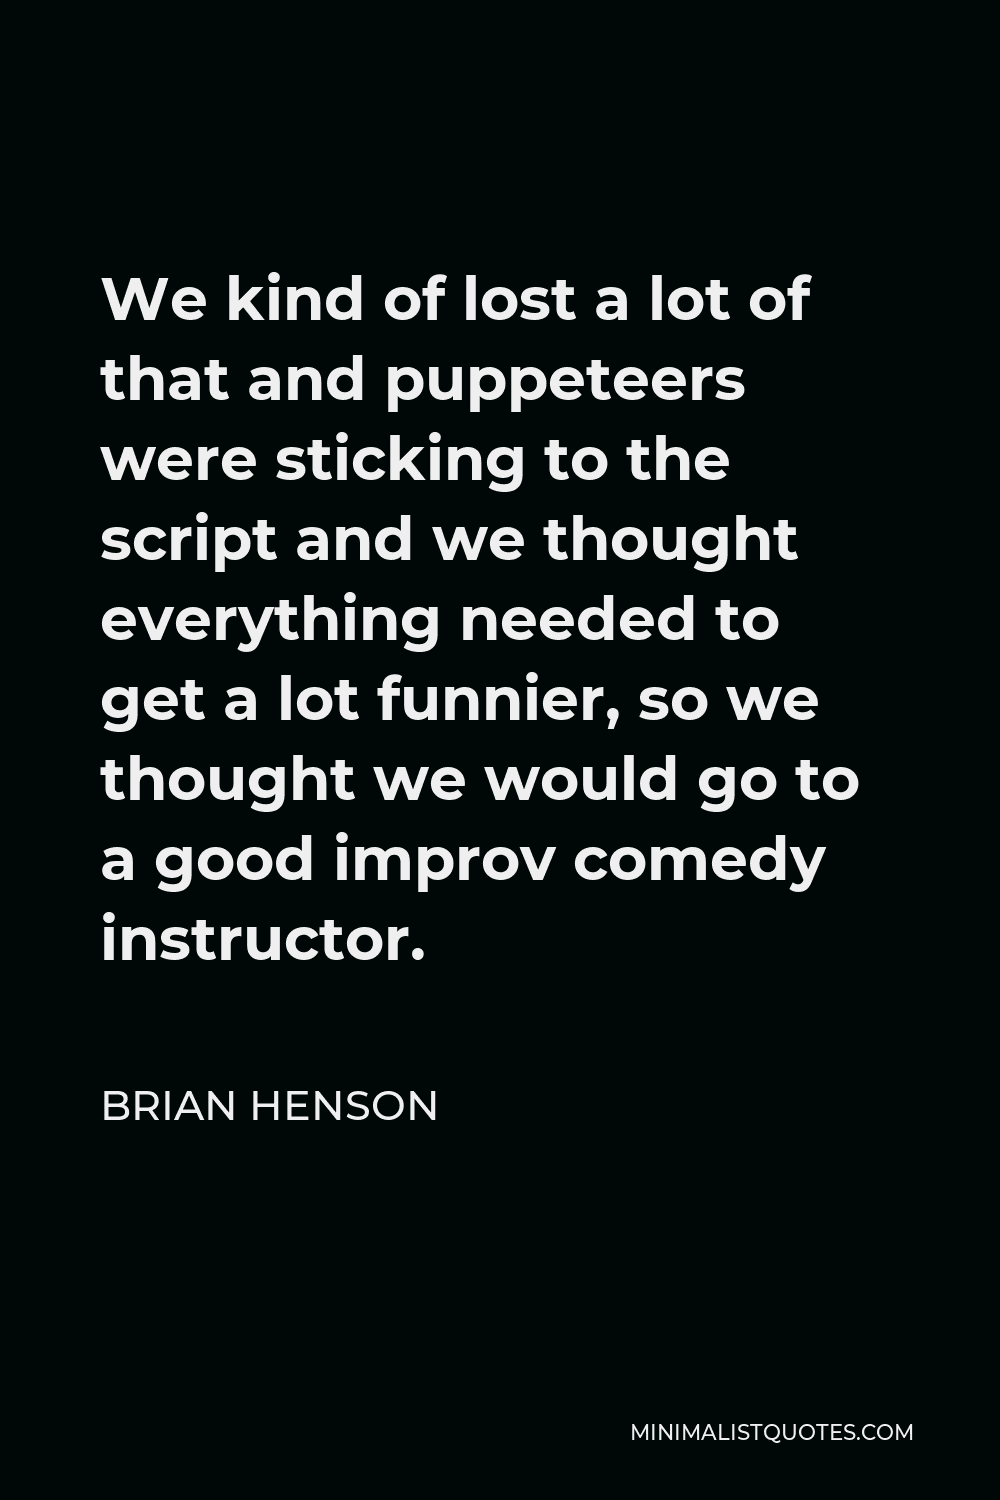 Brian Henson Quote - We kind of lost a lot of that and puppeteers were sticking to the script and we thought everything needed to get a lot funnier, so we thought we would go to a good improv comedy instructor.